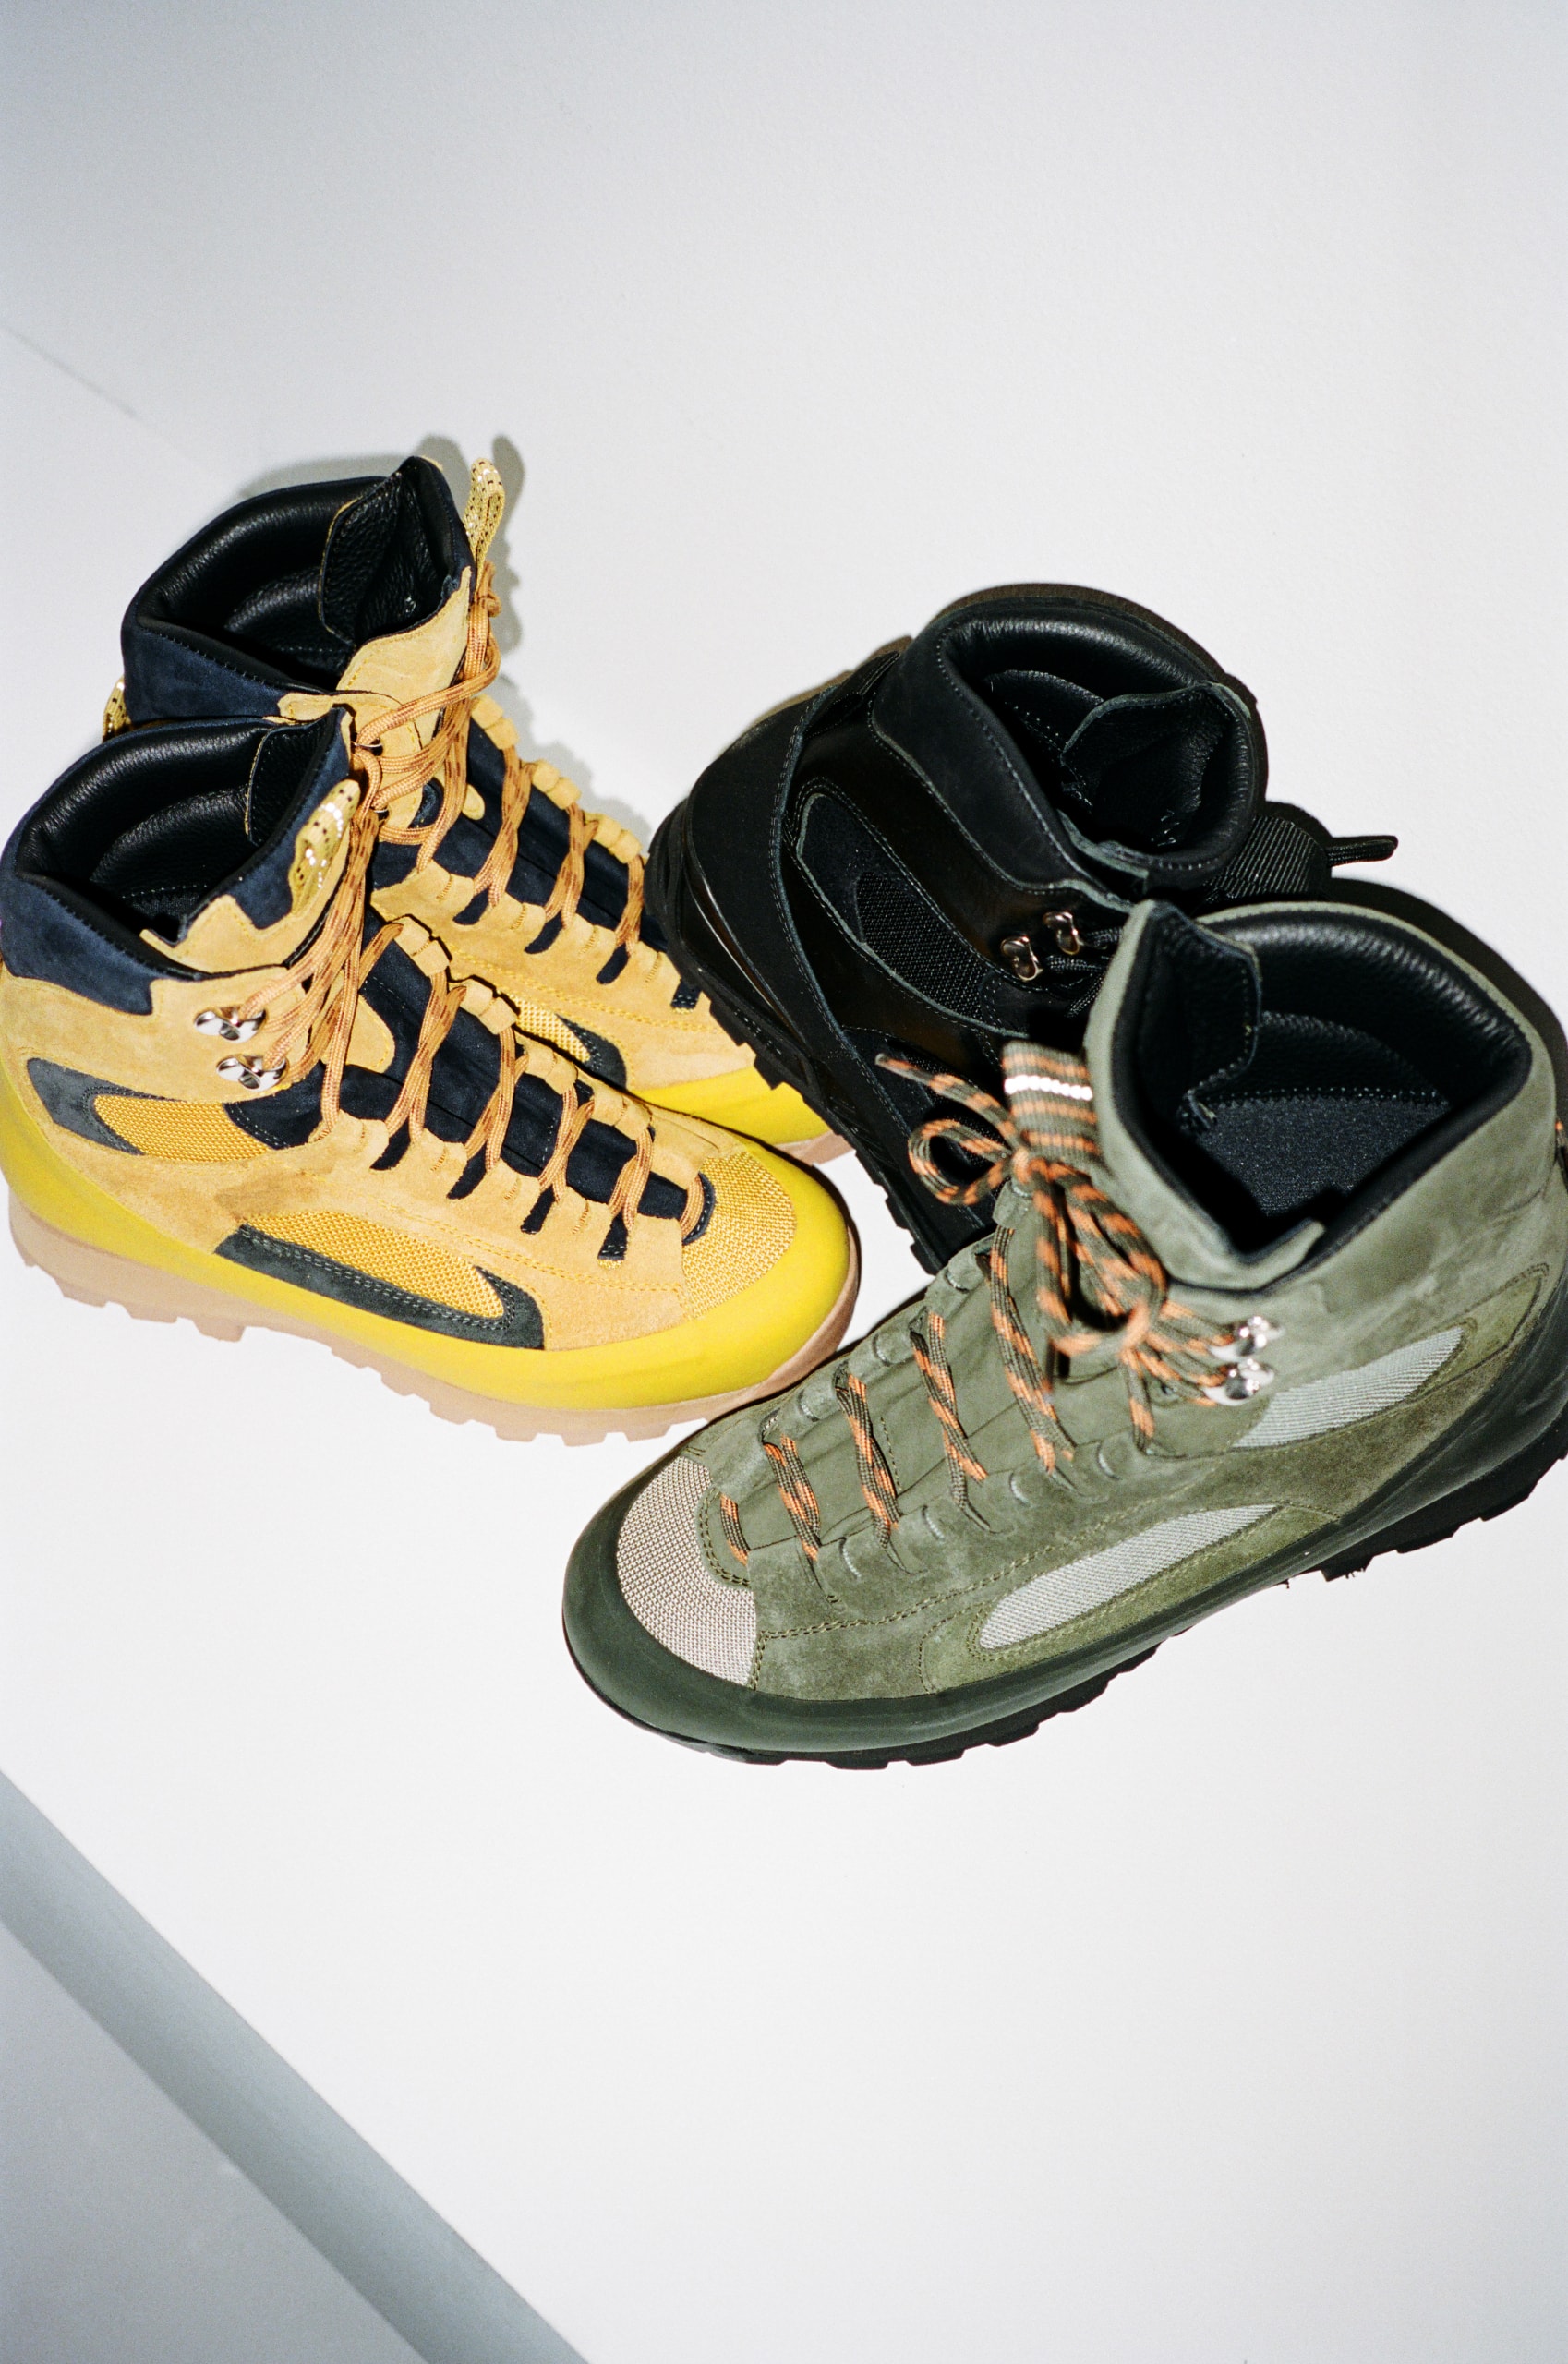 Diemme Releases a Loaded 30th Anniversary AW22 Collection multicolor green black gray yellow boots sneakers